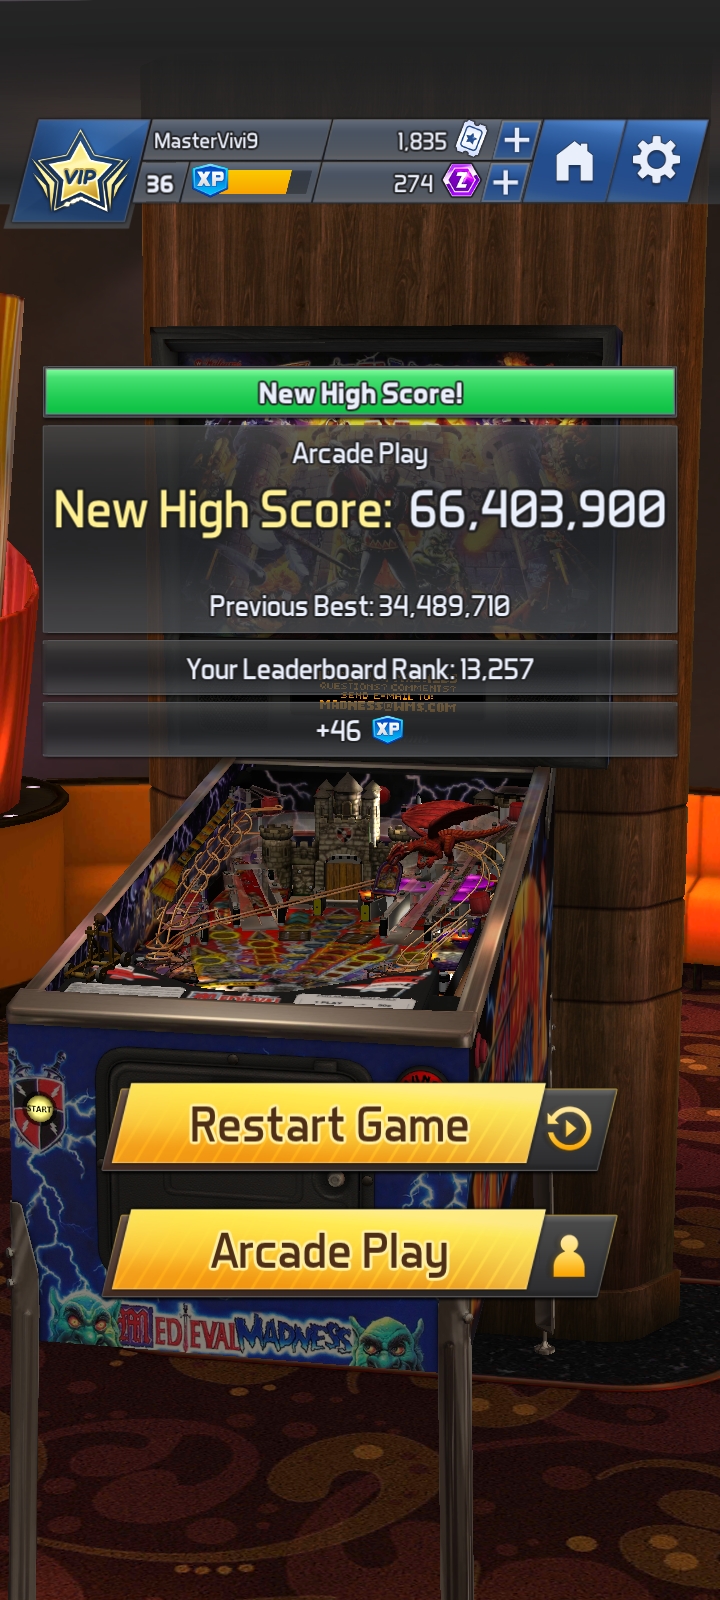 Hauntedprogram: Williams Pinball: Medieval Madness [Arcade Play] (Android) 66,403,900 points on 2022-10-21 22:14:49